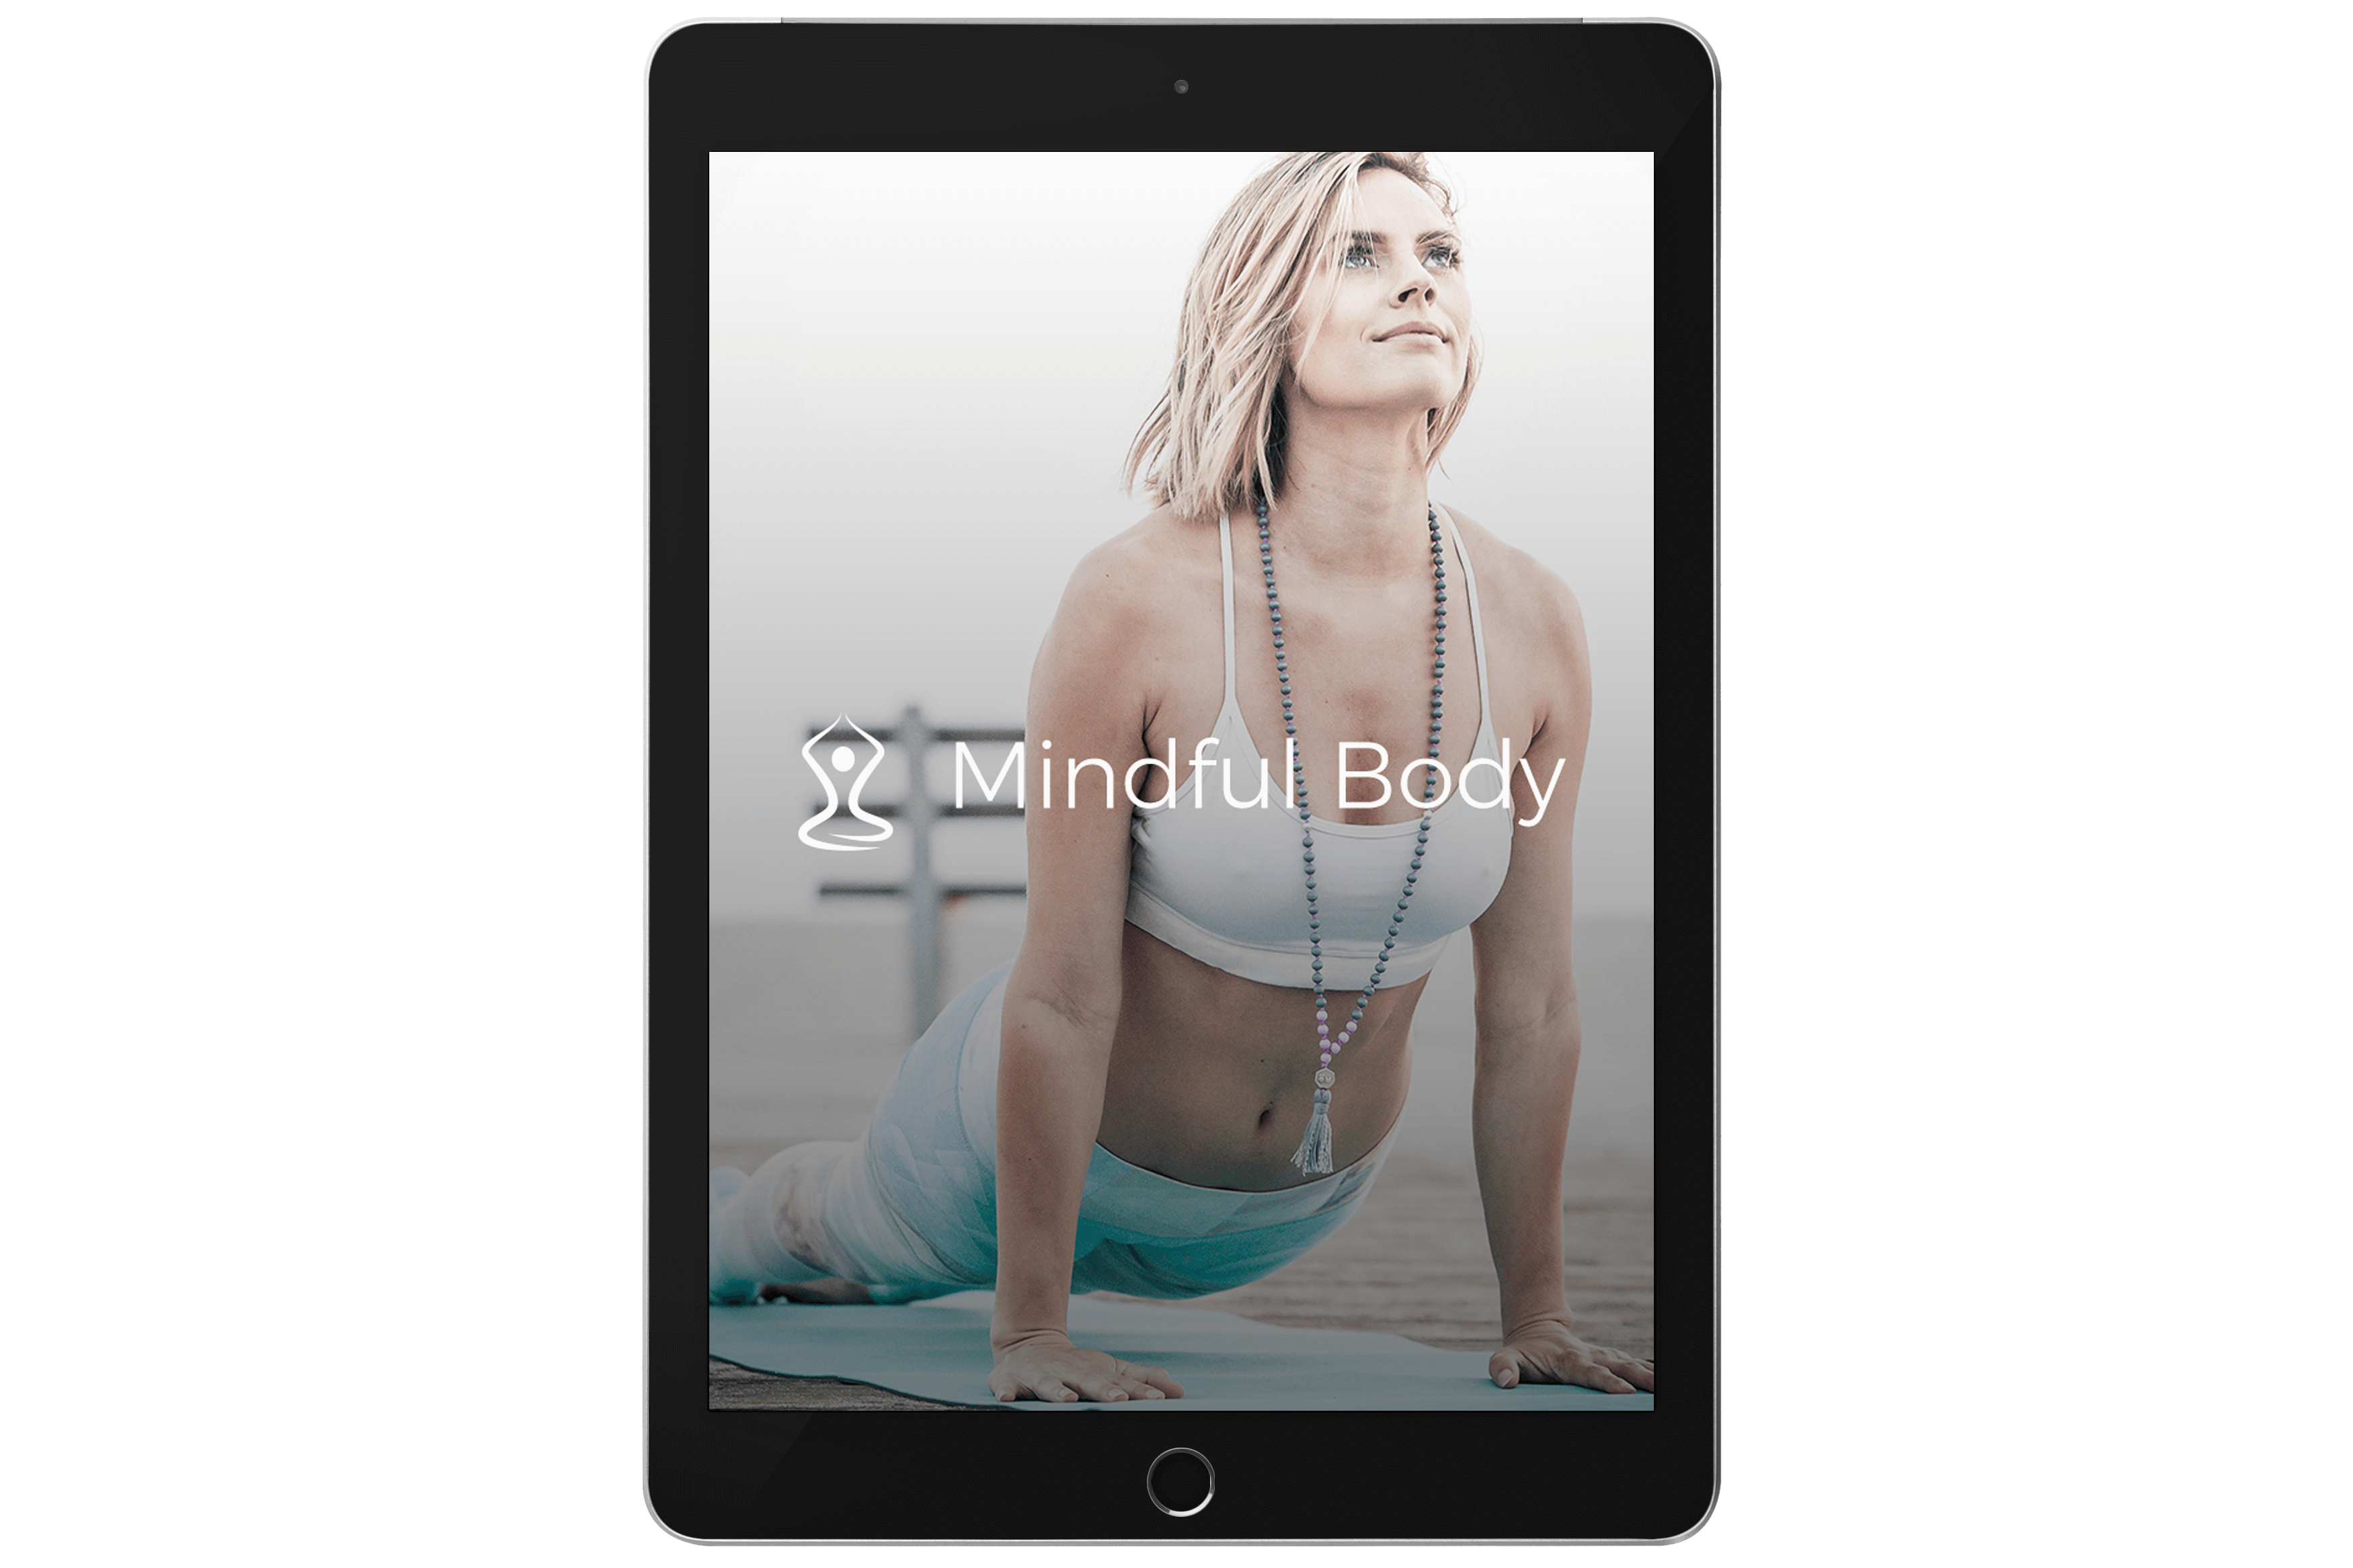 An image of the Mindful Body Program affiliate product.